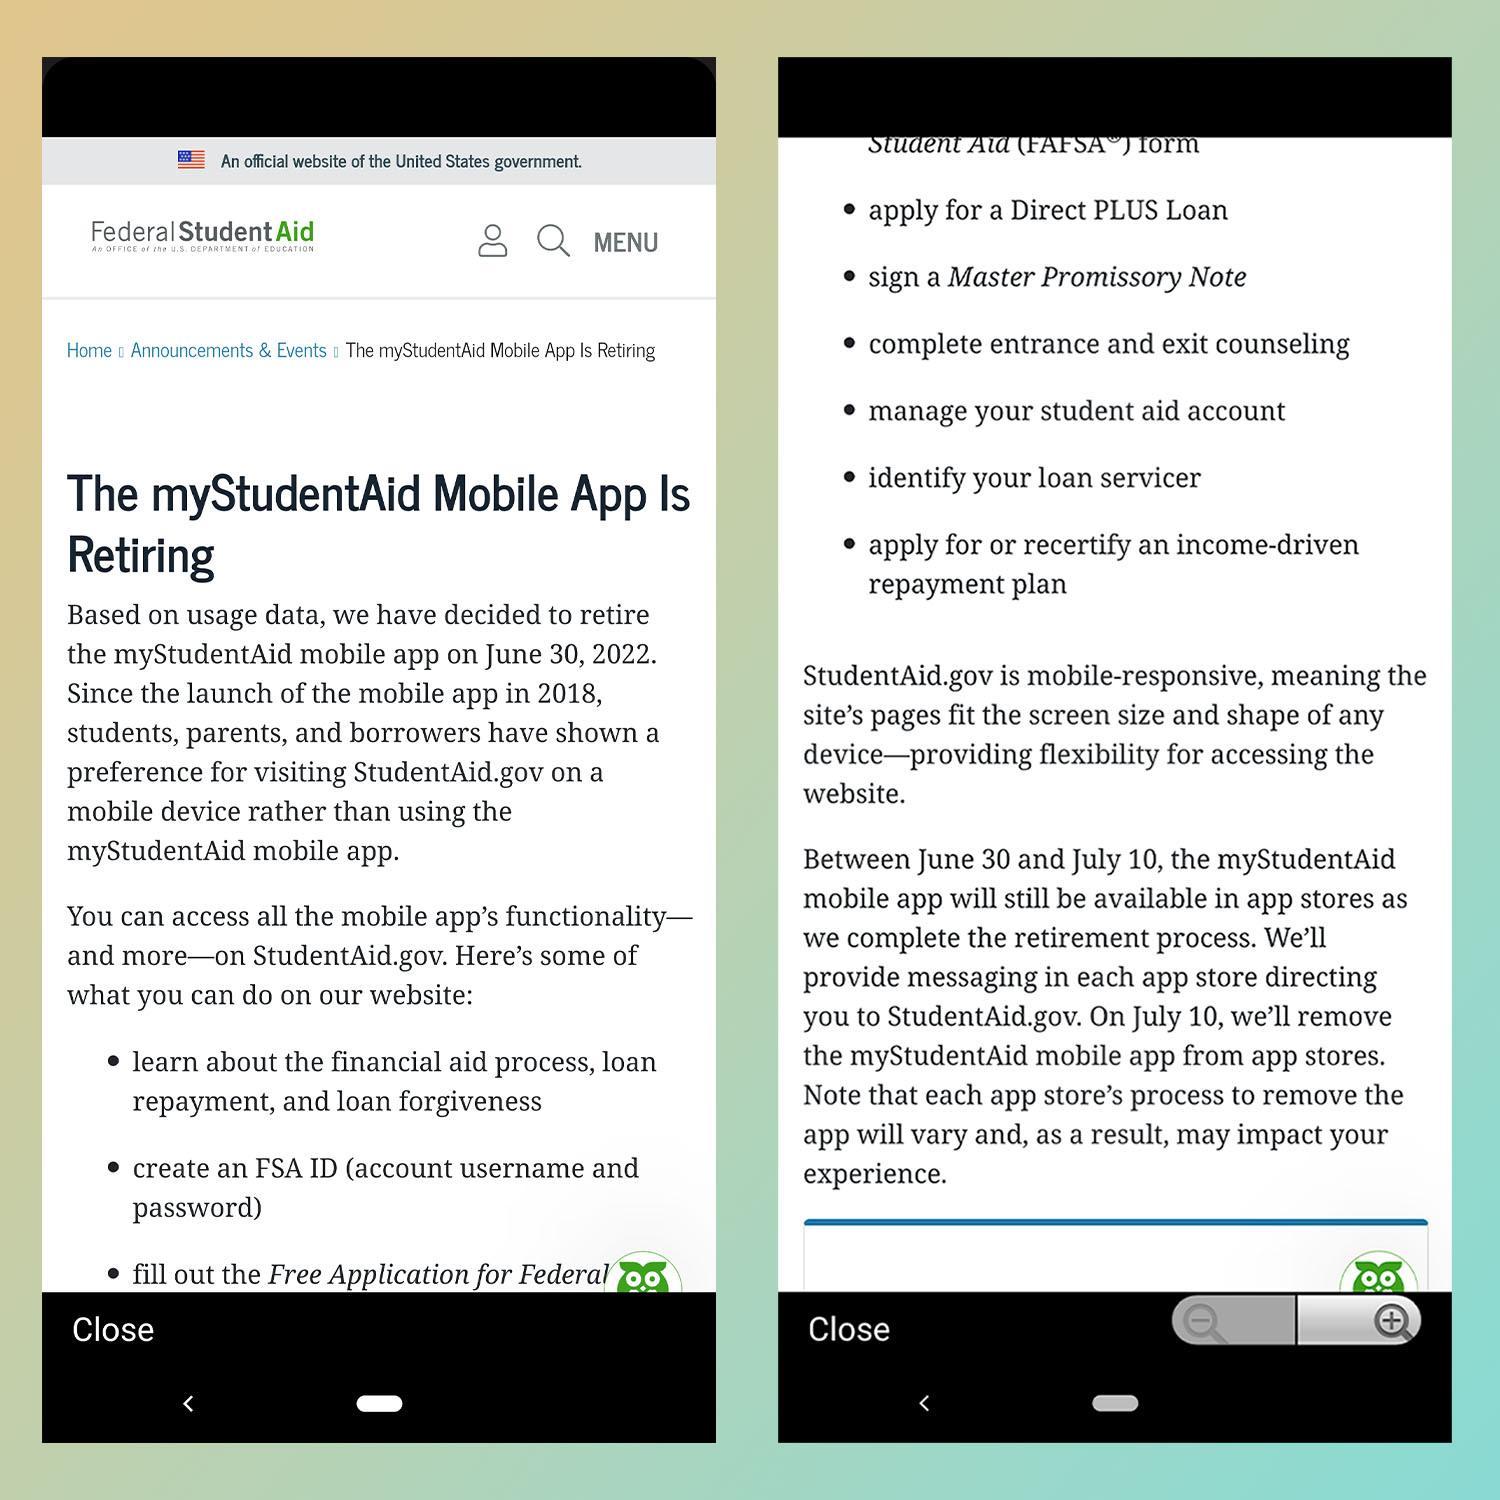 Announcement that MyStudentAid app to be retired 6-30-22.